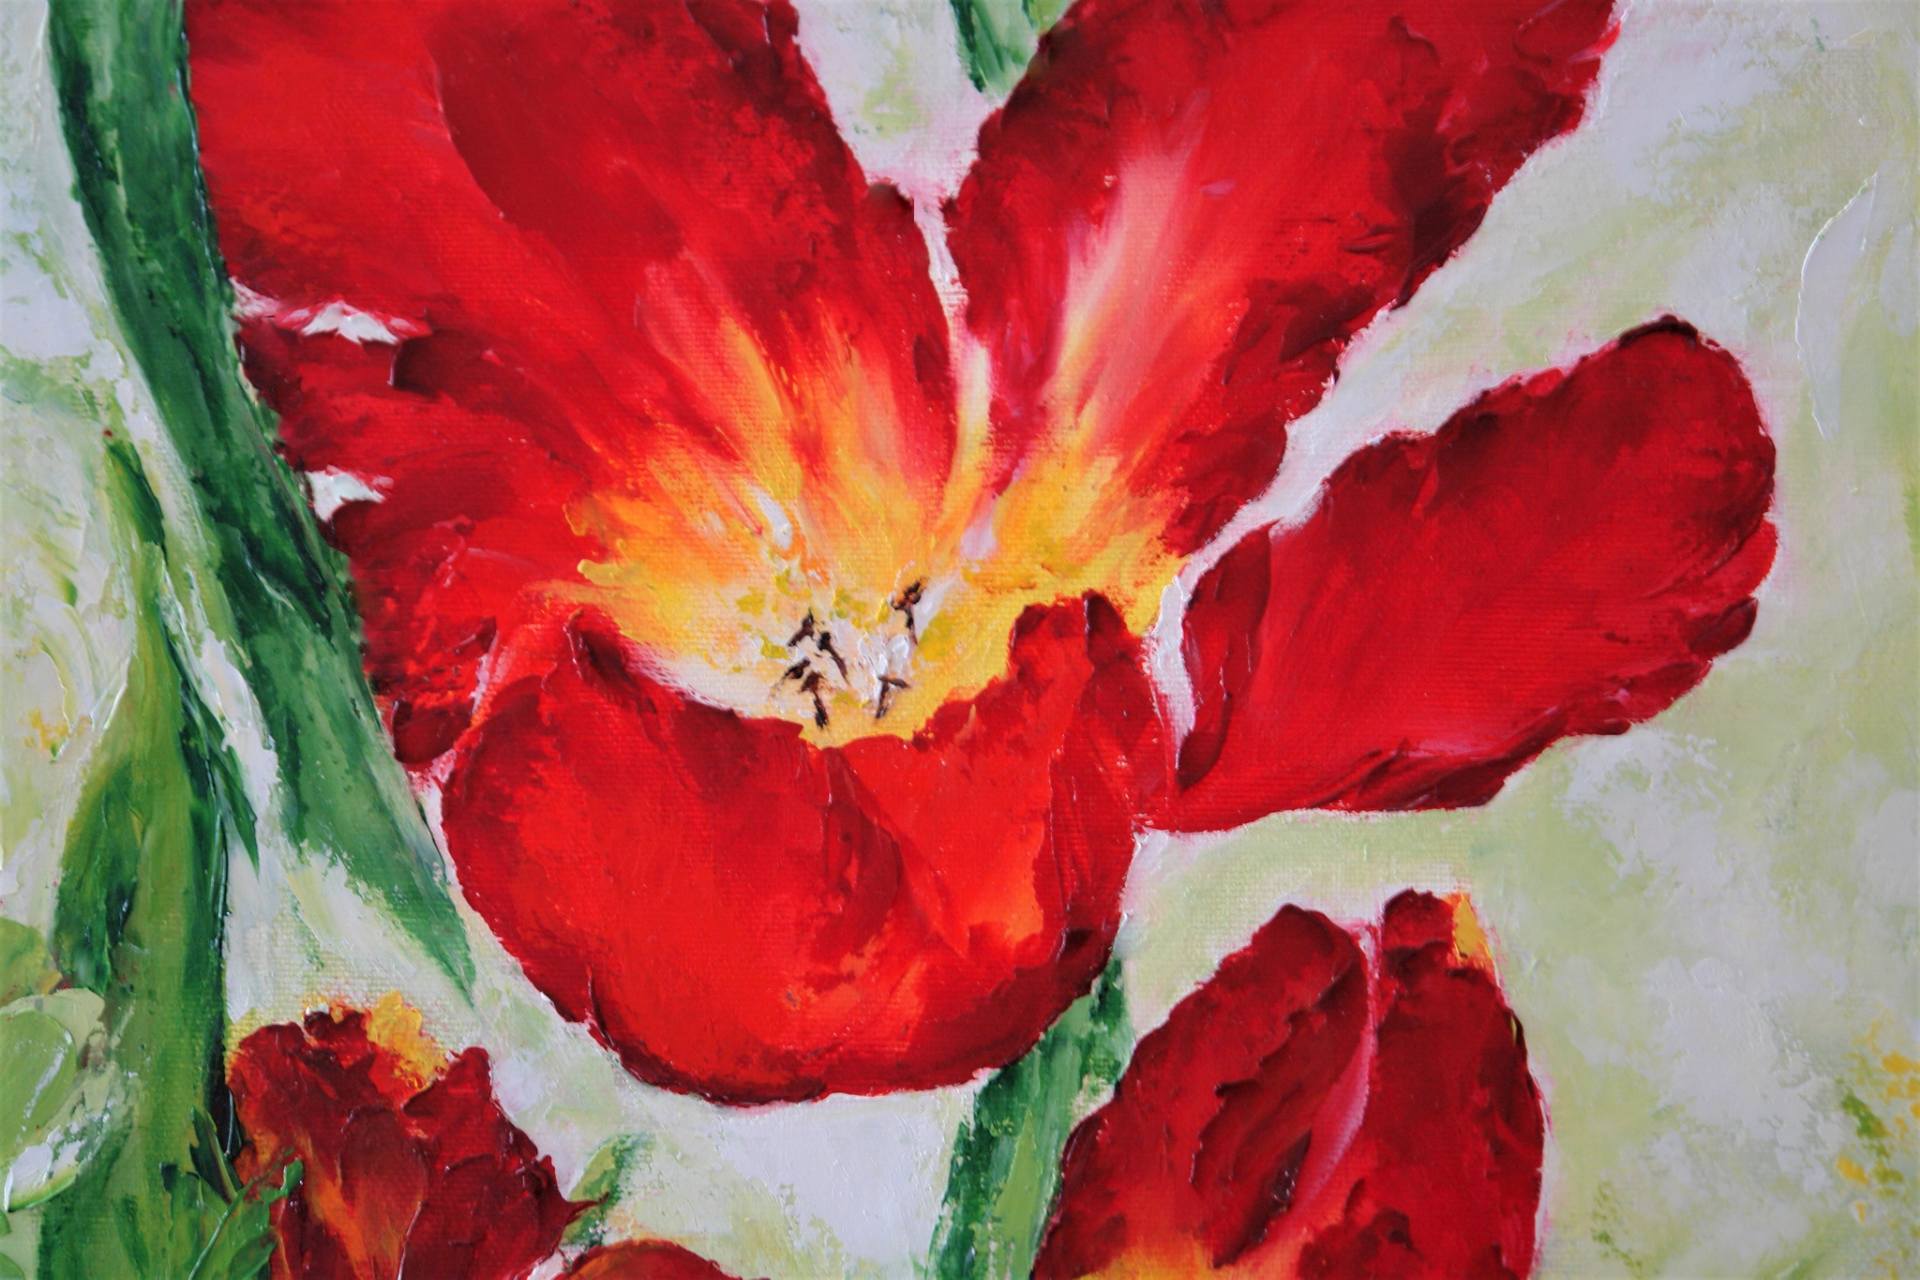 Saatchi Art: Blossom series. Red tulips, oil painting on canvas ...